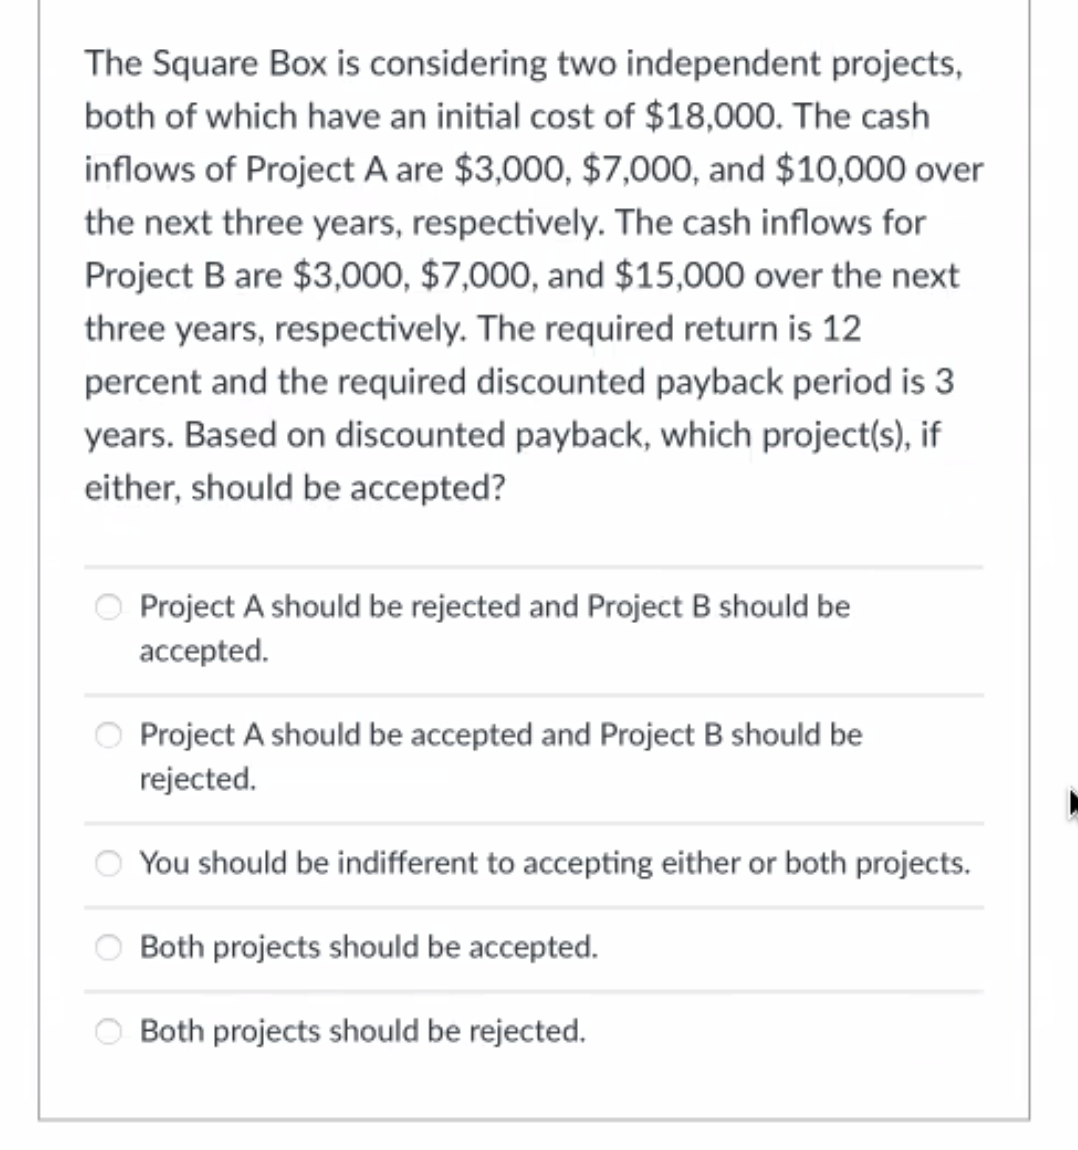 The Square Box is considering two independent projects,
both of which have an initial cost of $18,000. The cash
inflows of Project A are $3,000, $7,000, and $10,000 over
the next three years, respectively. The cash inflows for
Project B are $3,000, $7,000, and $15,000 over the next
three years, respectively. The required return is 12
percent and the required discounted payback period is 3
years. Based on discounted payback, which project(s), if
either, should be accepted?
Project A should be rejected and Project B should be
accepted.
Project A should be accepted and Project B should be
rejected.
You should be indifferent to accepting either or both projects.
Both projects should be accepted.
Both projects should be rejected.
